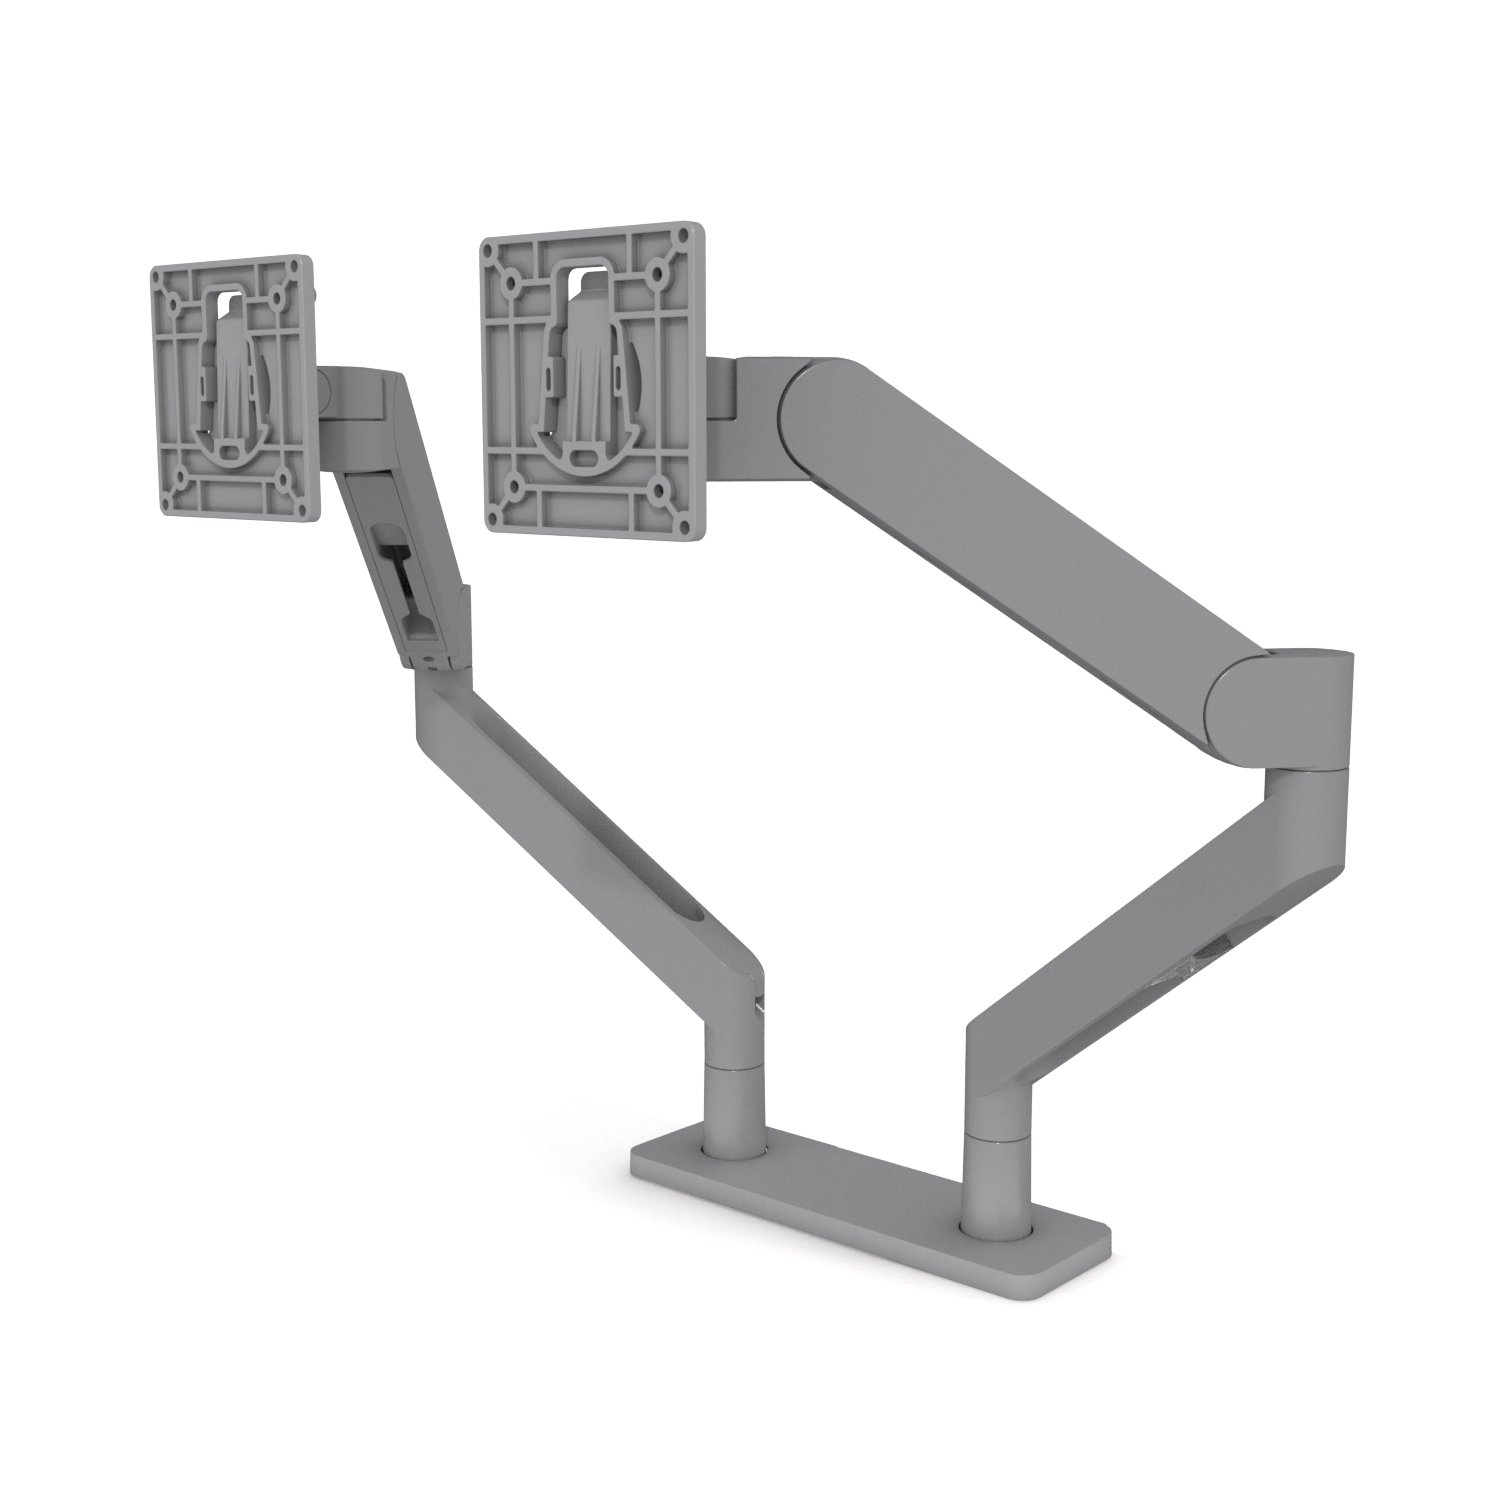 Swerv Dual Monitor Arm, by Teknion (for SMU)